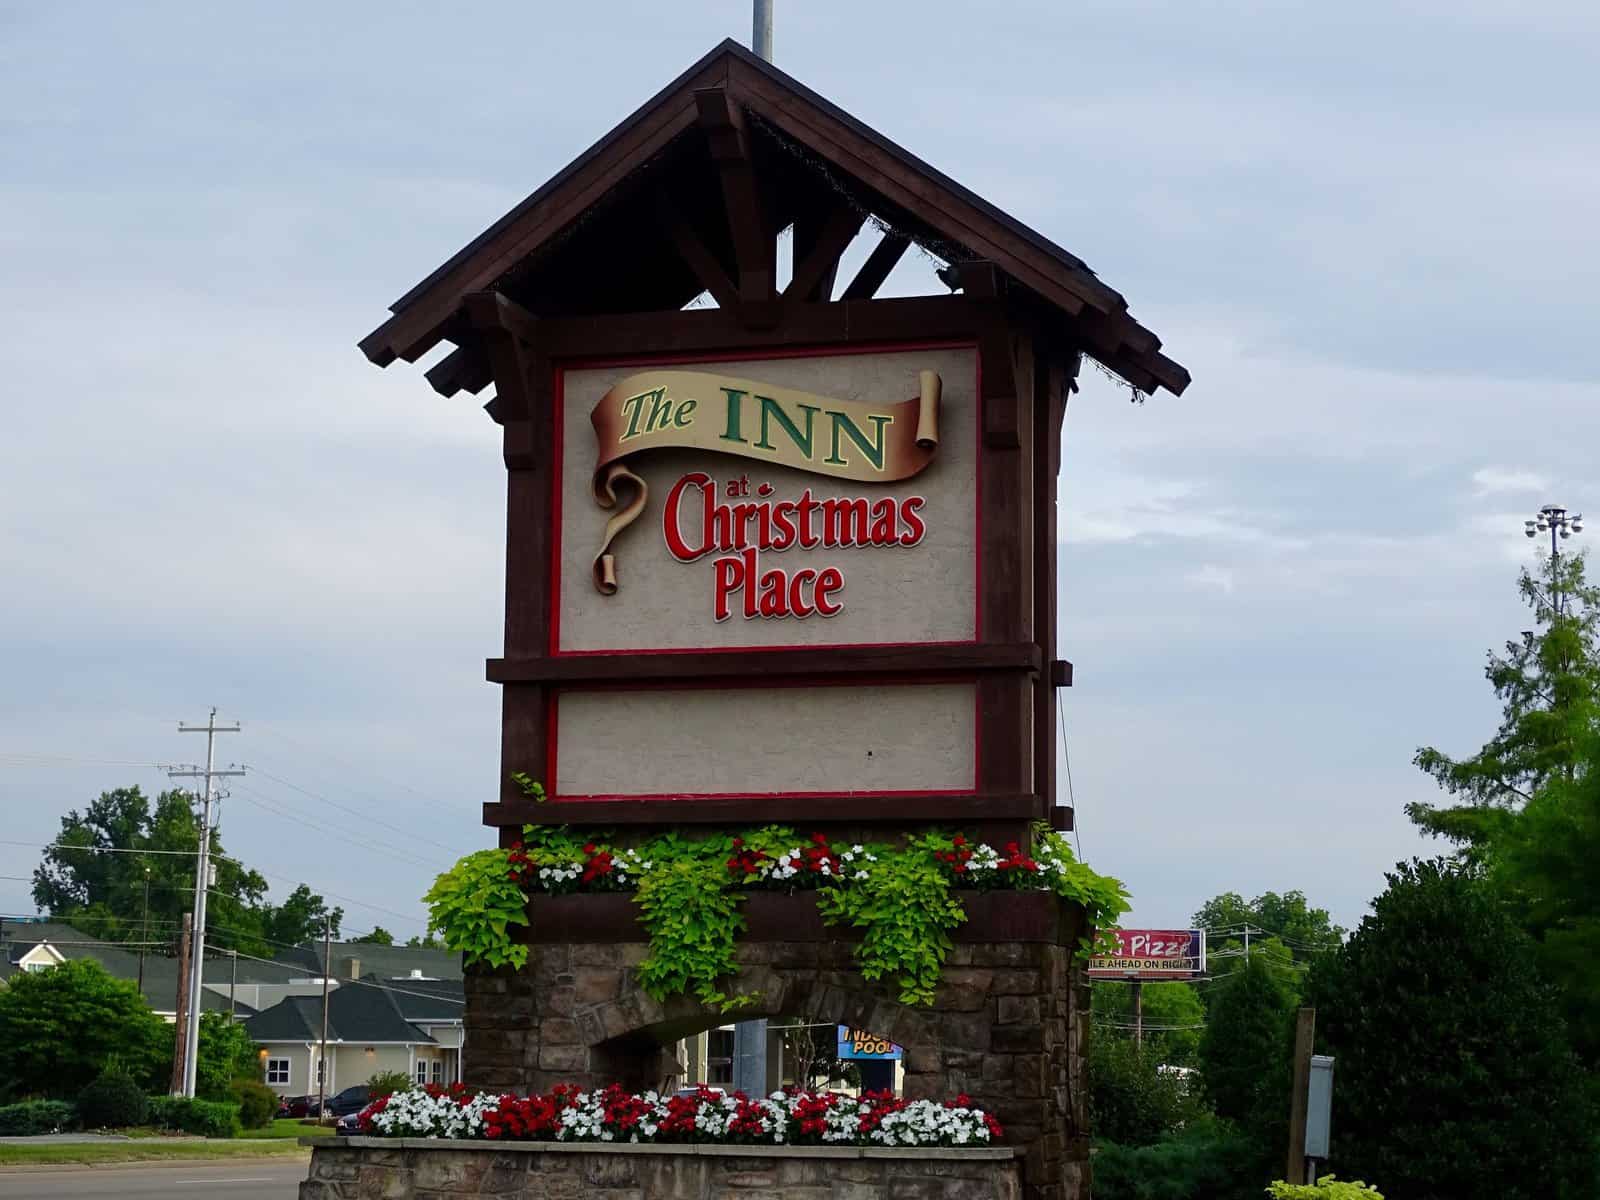 The Inn at Christmas Place in Pigeon Forge, TN